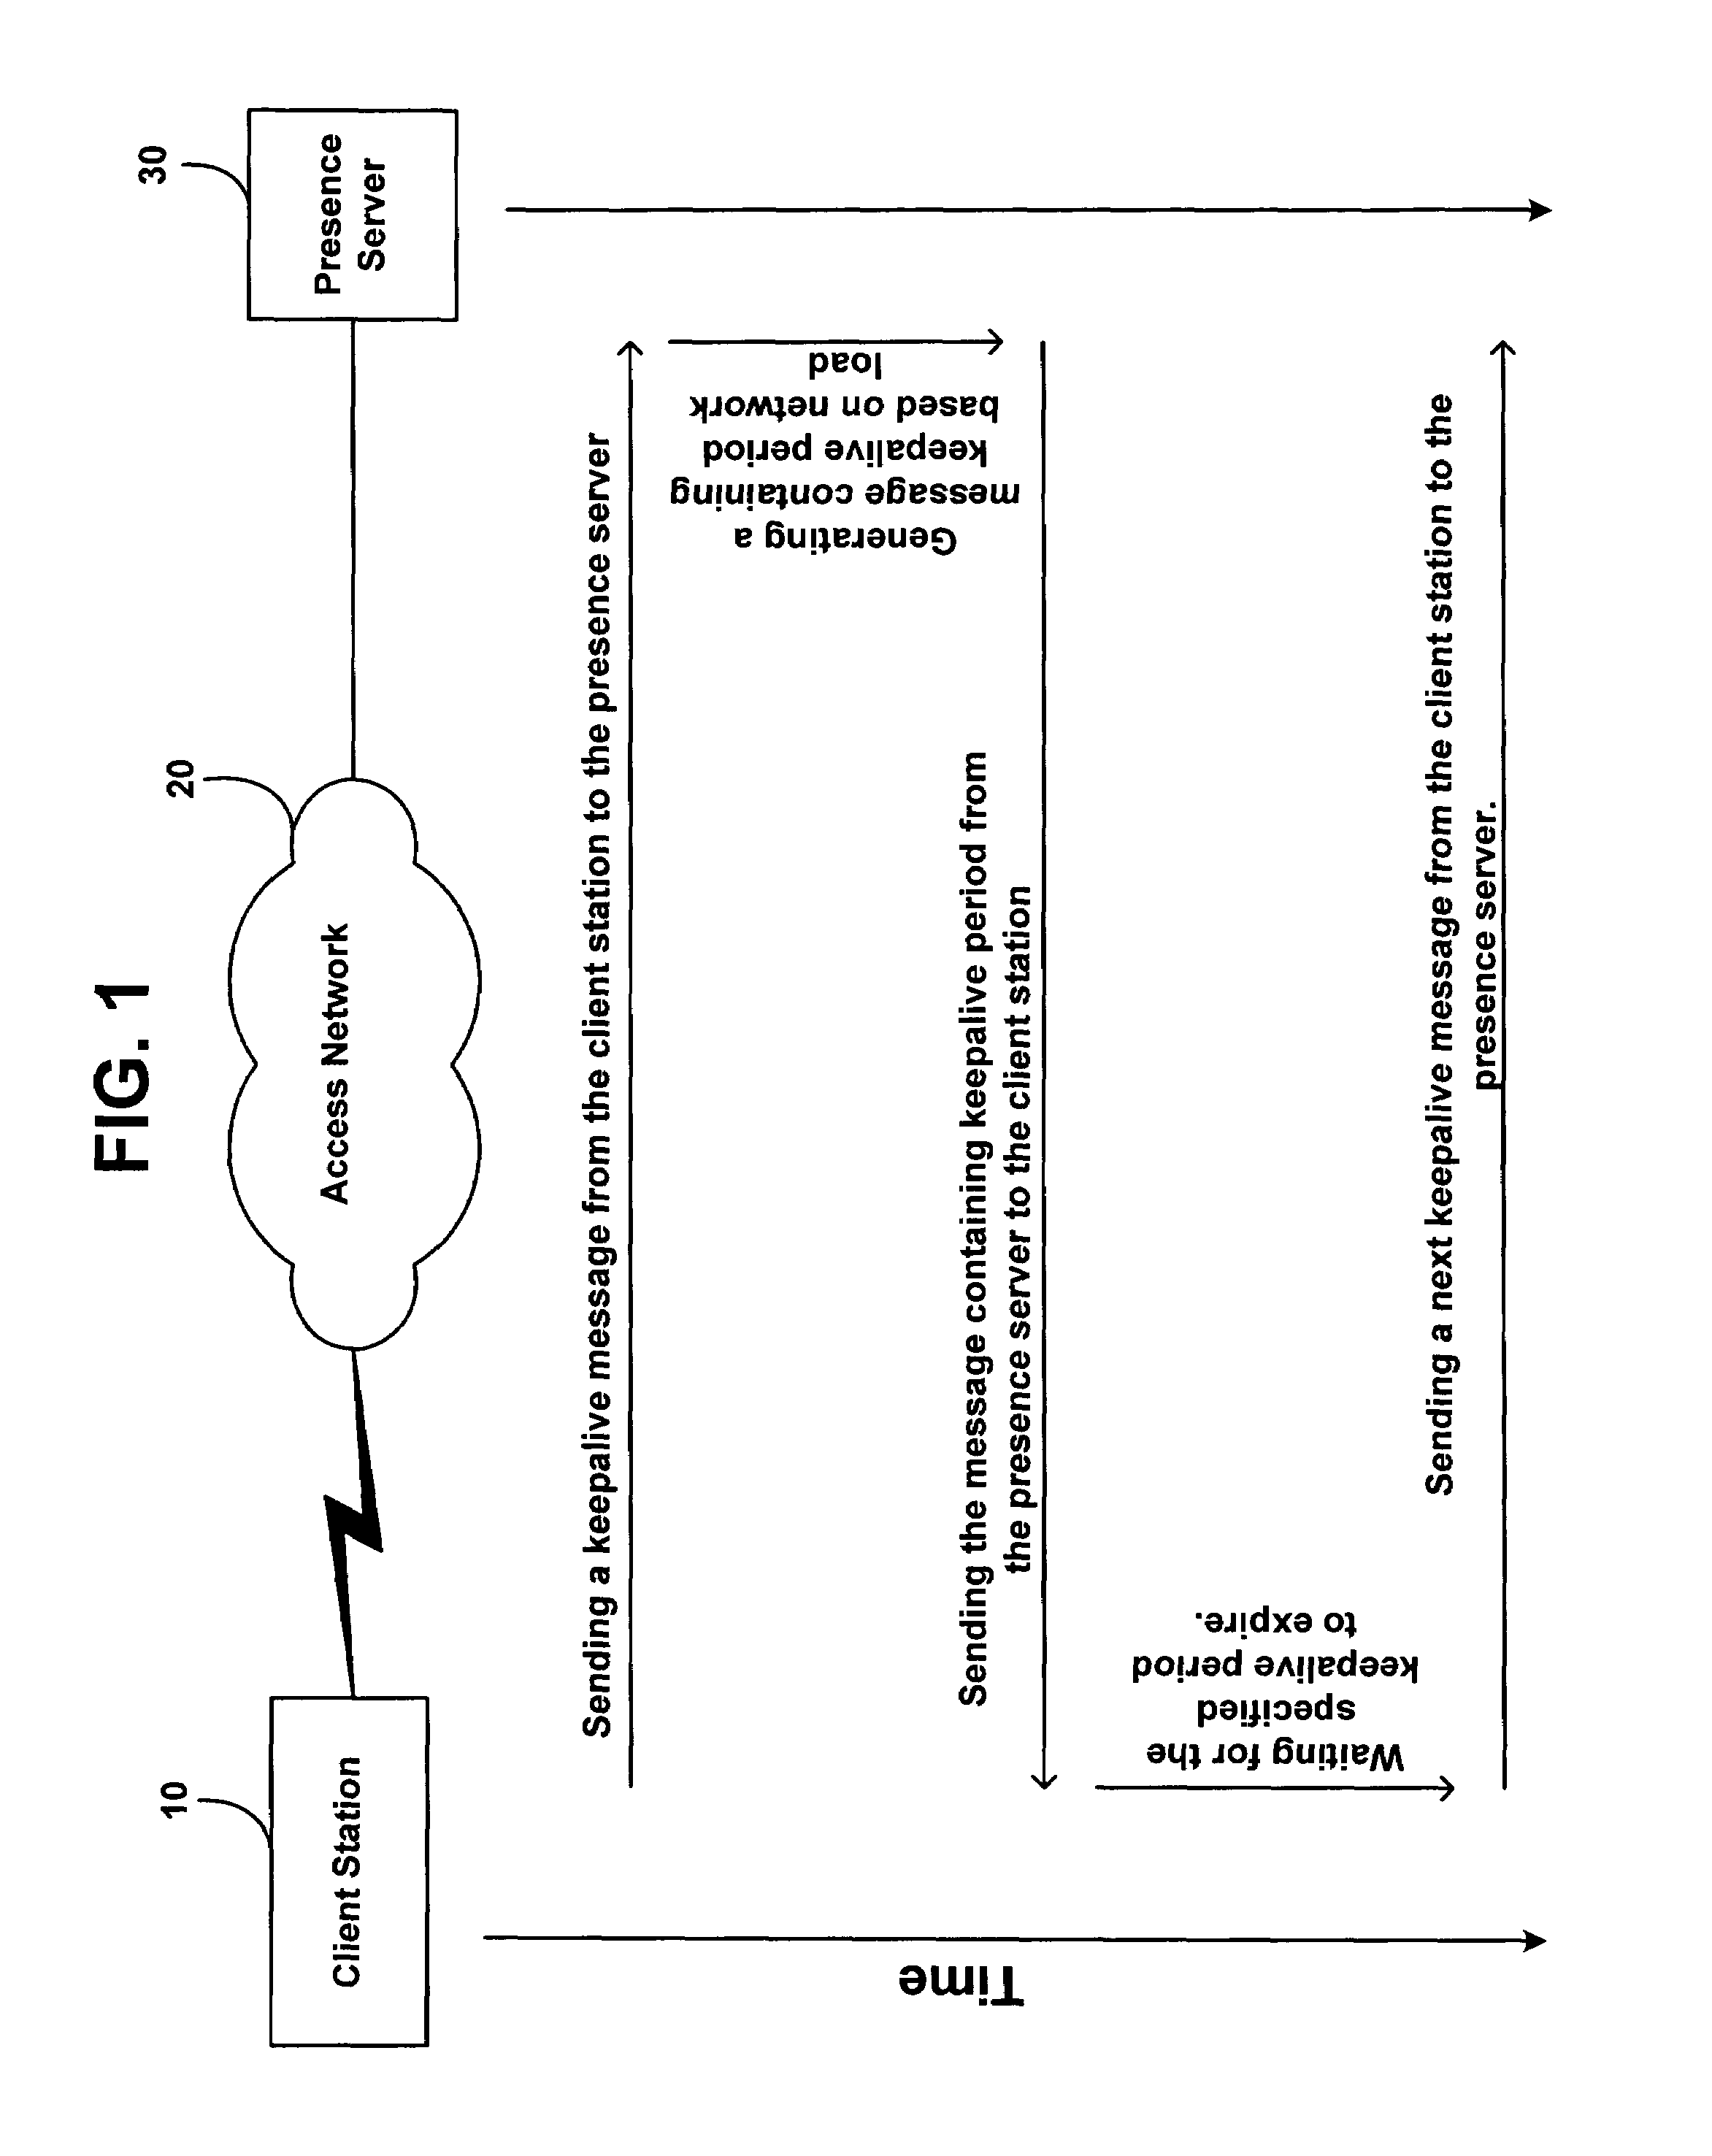 Method and system for updating network presence records at a rate dependent on network load